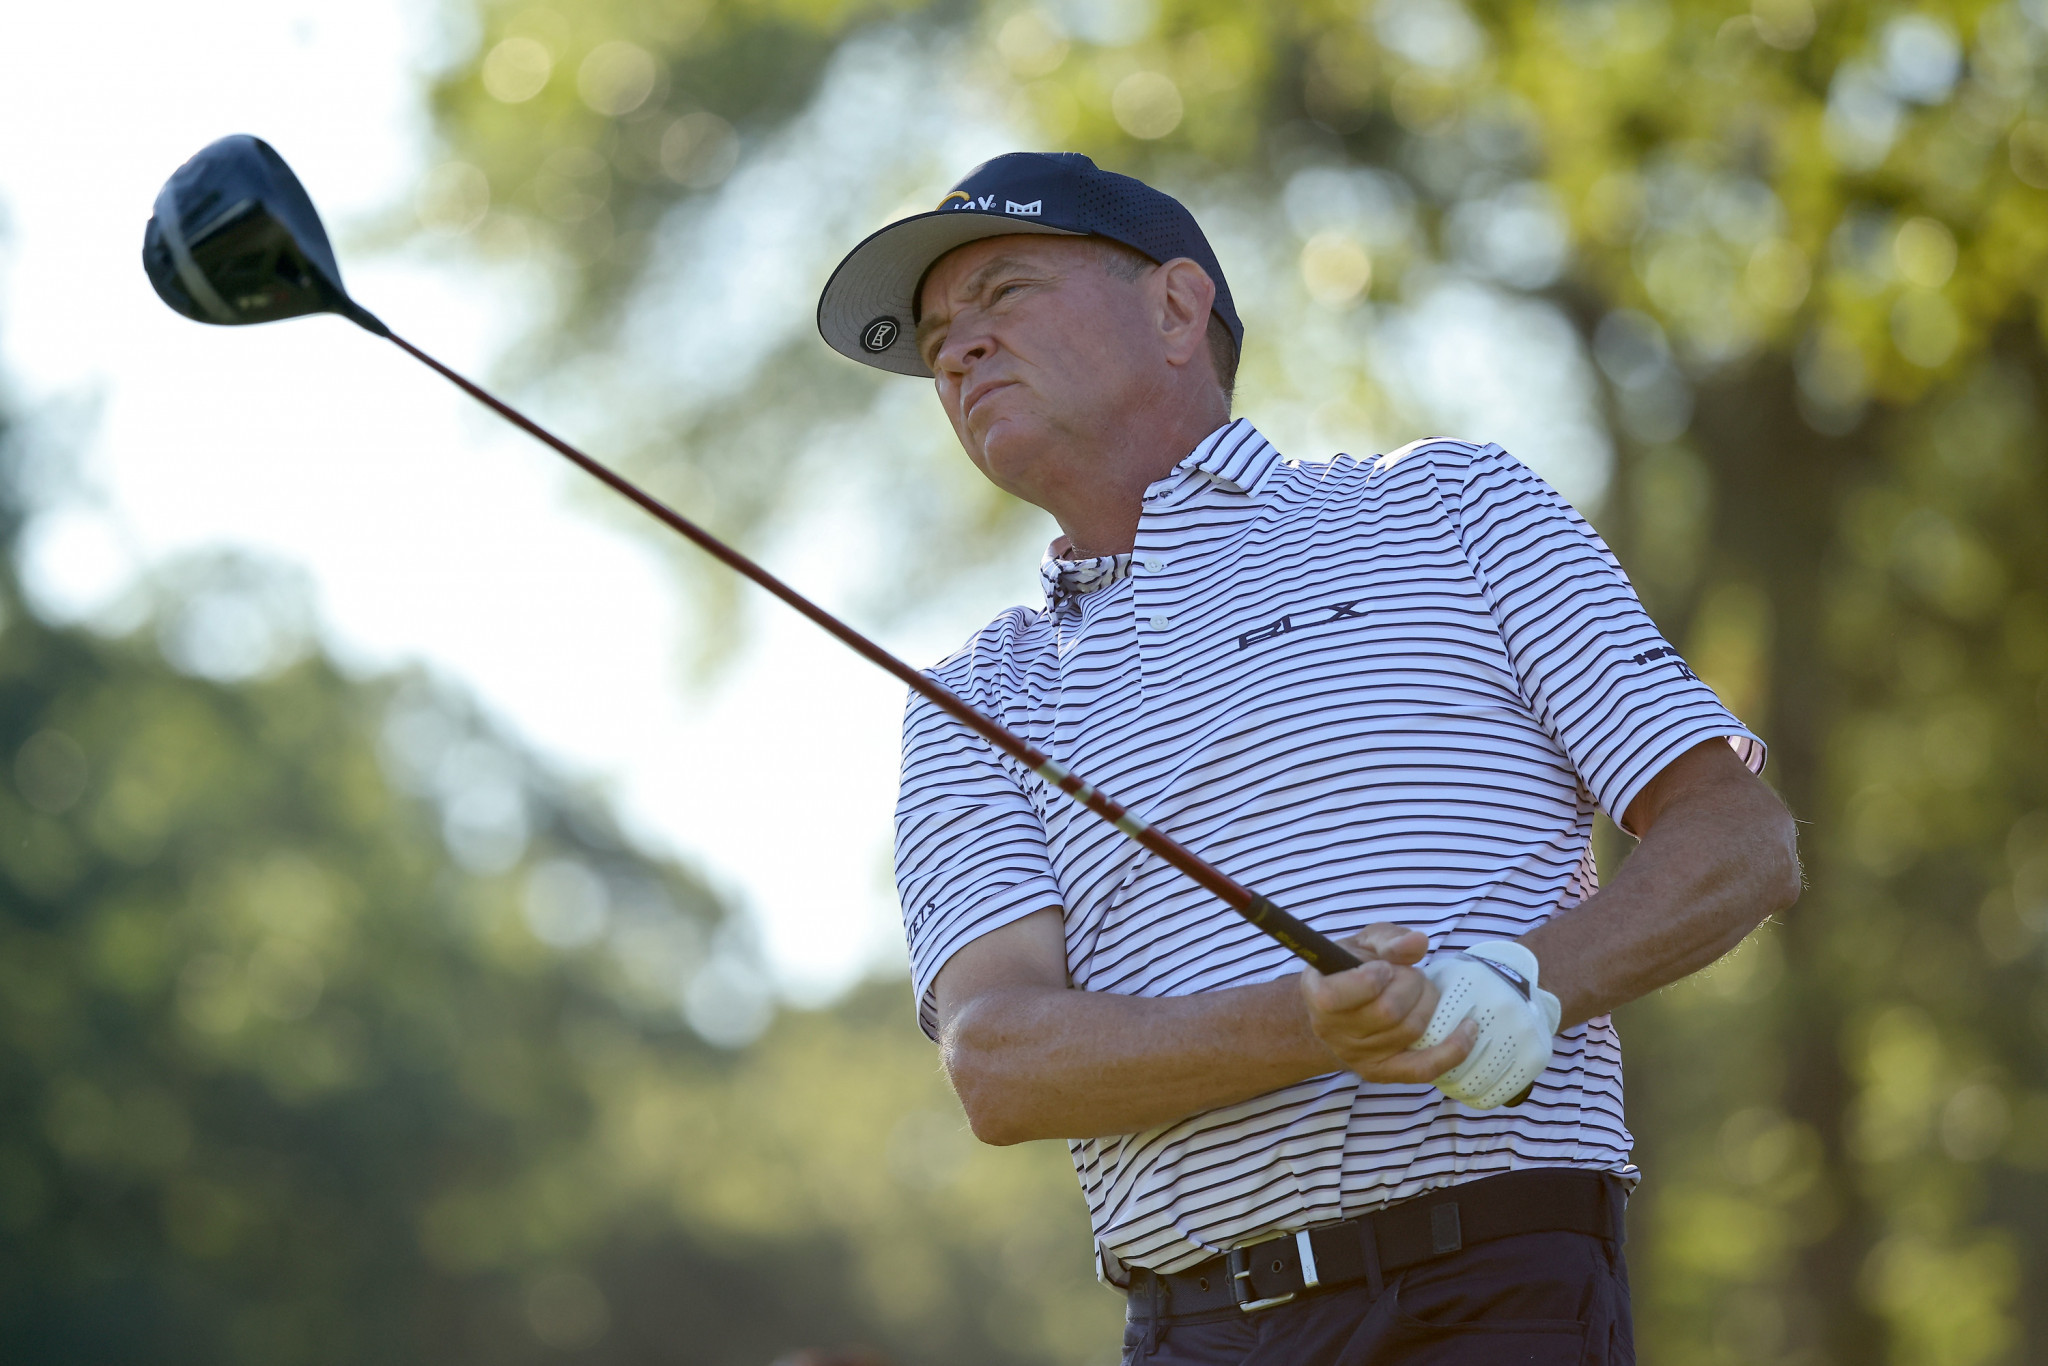 Davis Love III believes PGA Tour players could choose to boycott events if the LIV Golf rebels win their legal battle ©Getty Images